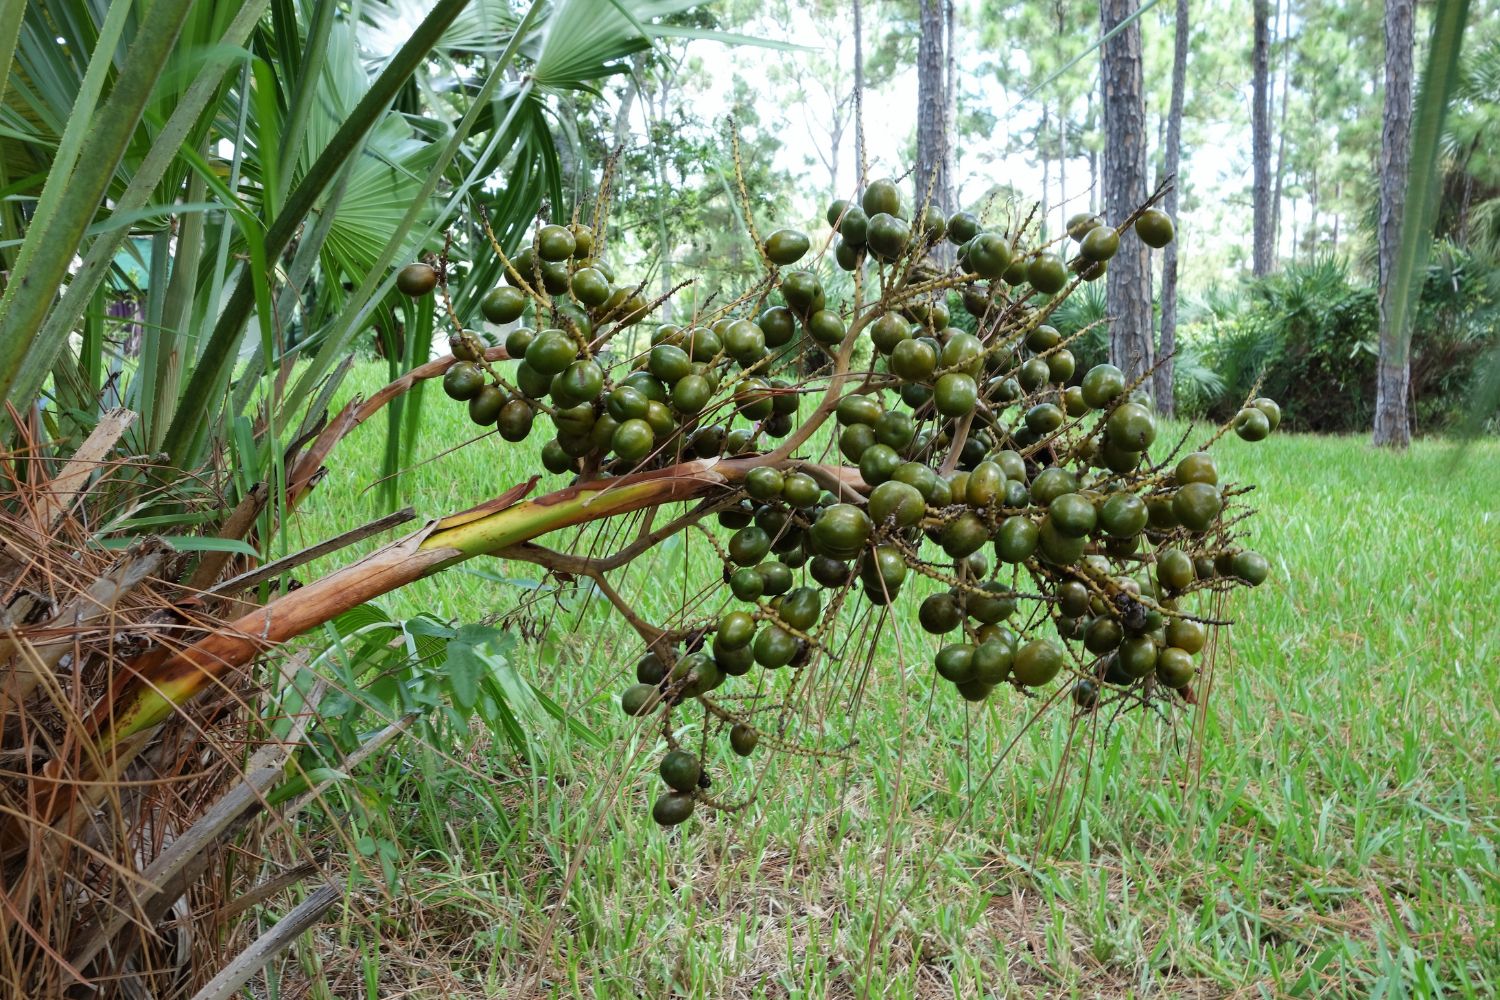 The Ultimate Guide to Saw Palmetto: Benefits, Side Effects, and Uses